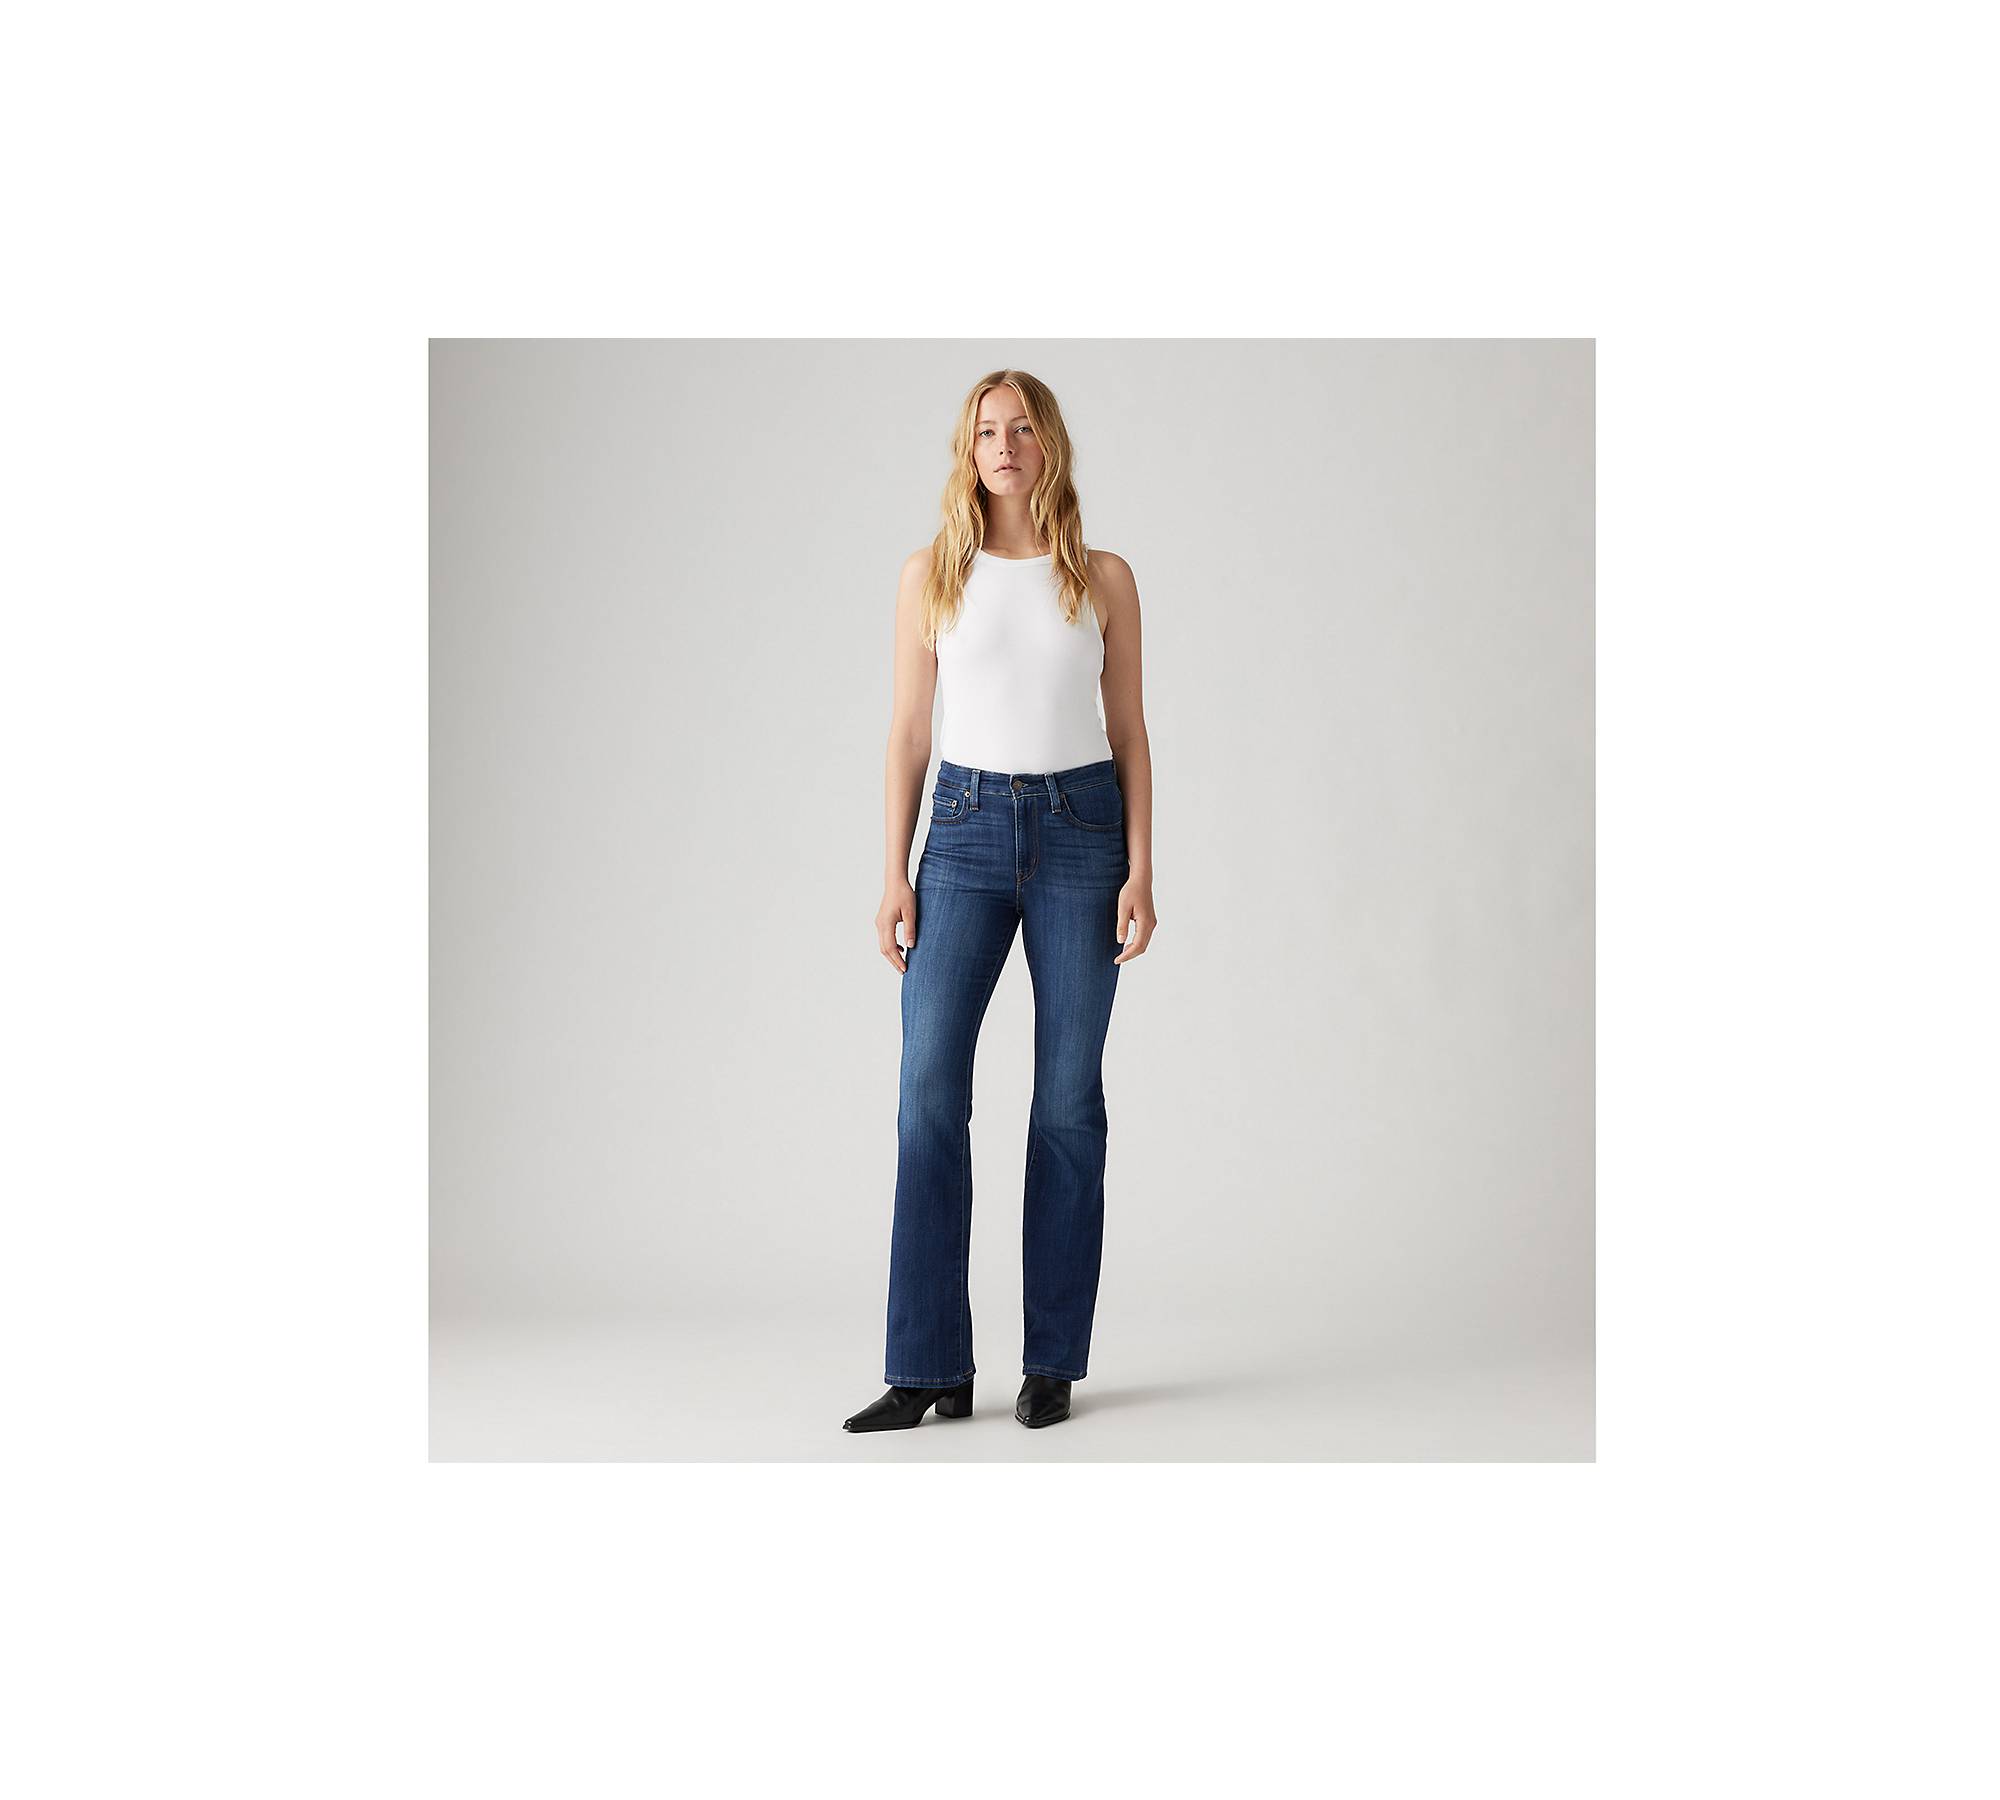 Levi's® Women's High-rise Wedgie Straight Cropped Jeans - Fall Star 26 :  Target